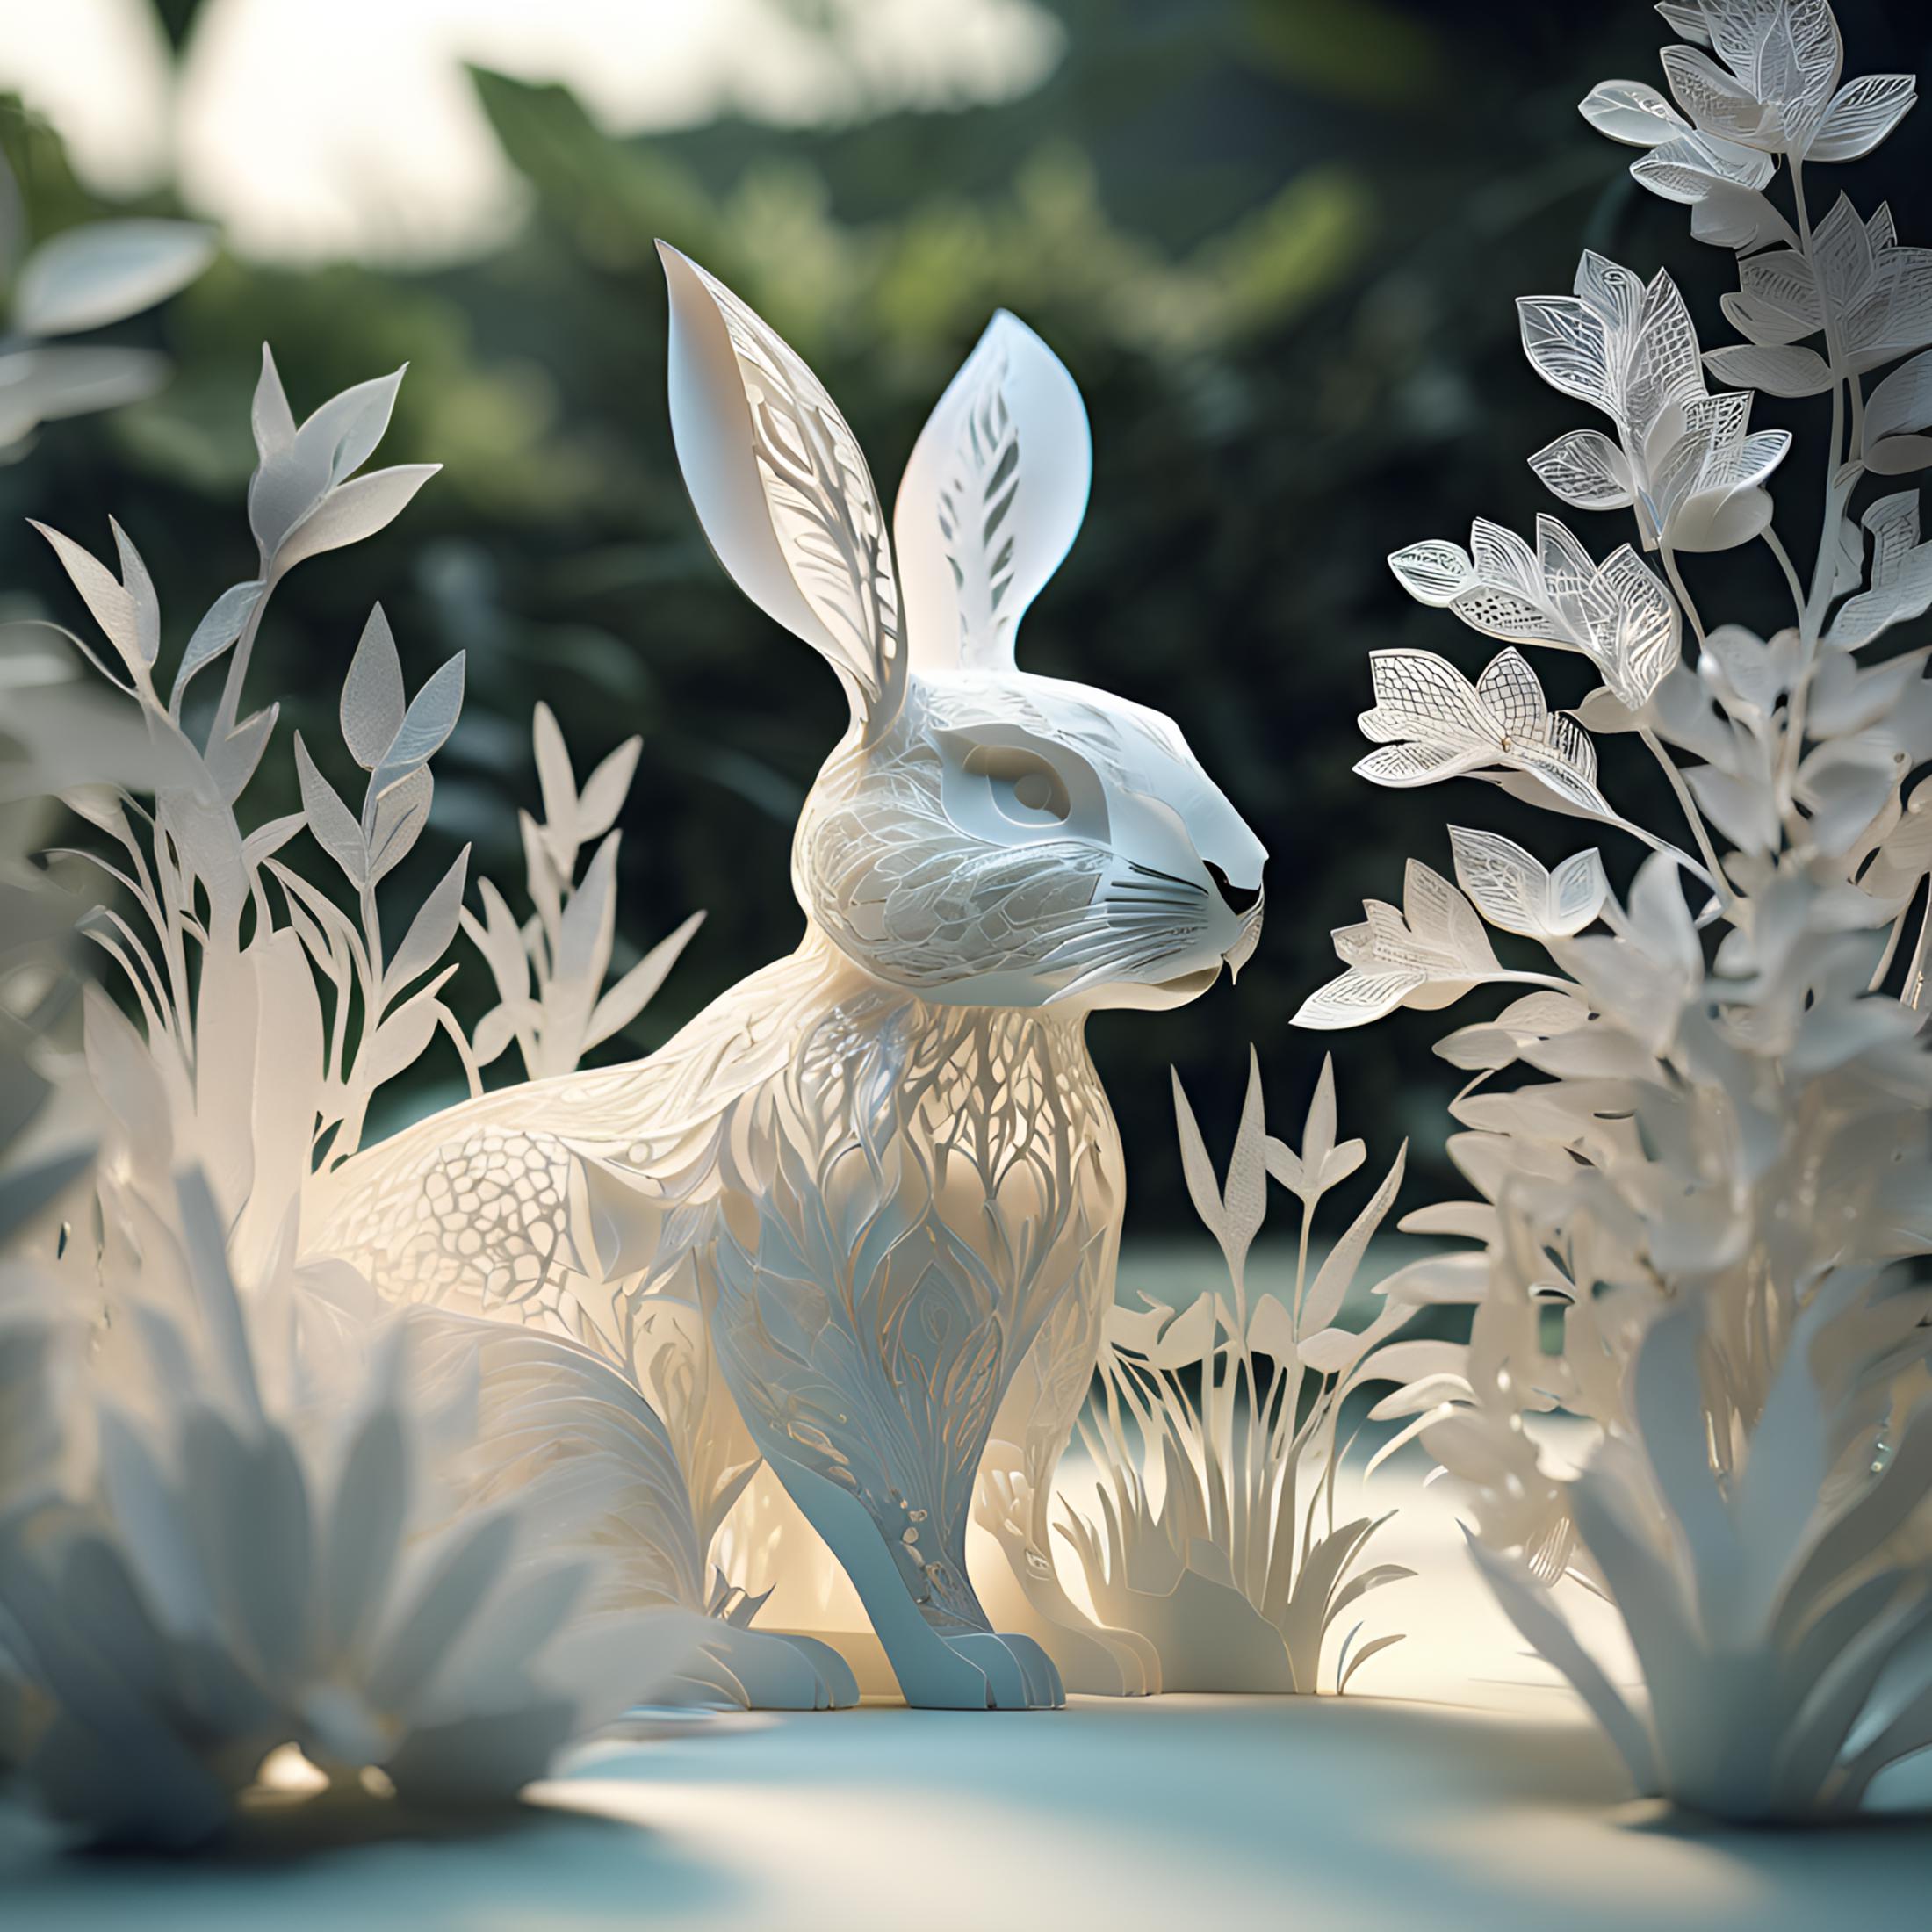 XL Realistic paper carving art style image by Standspurfahrer